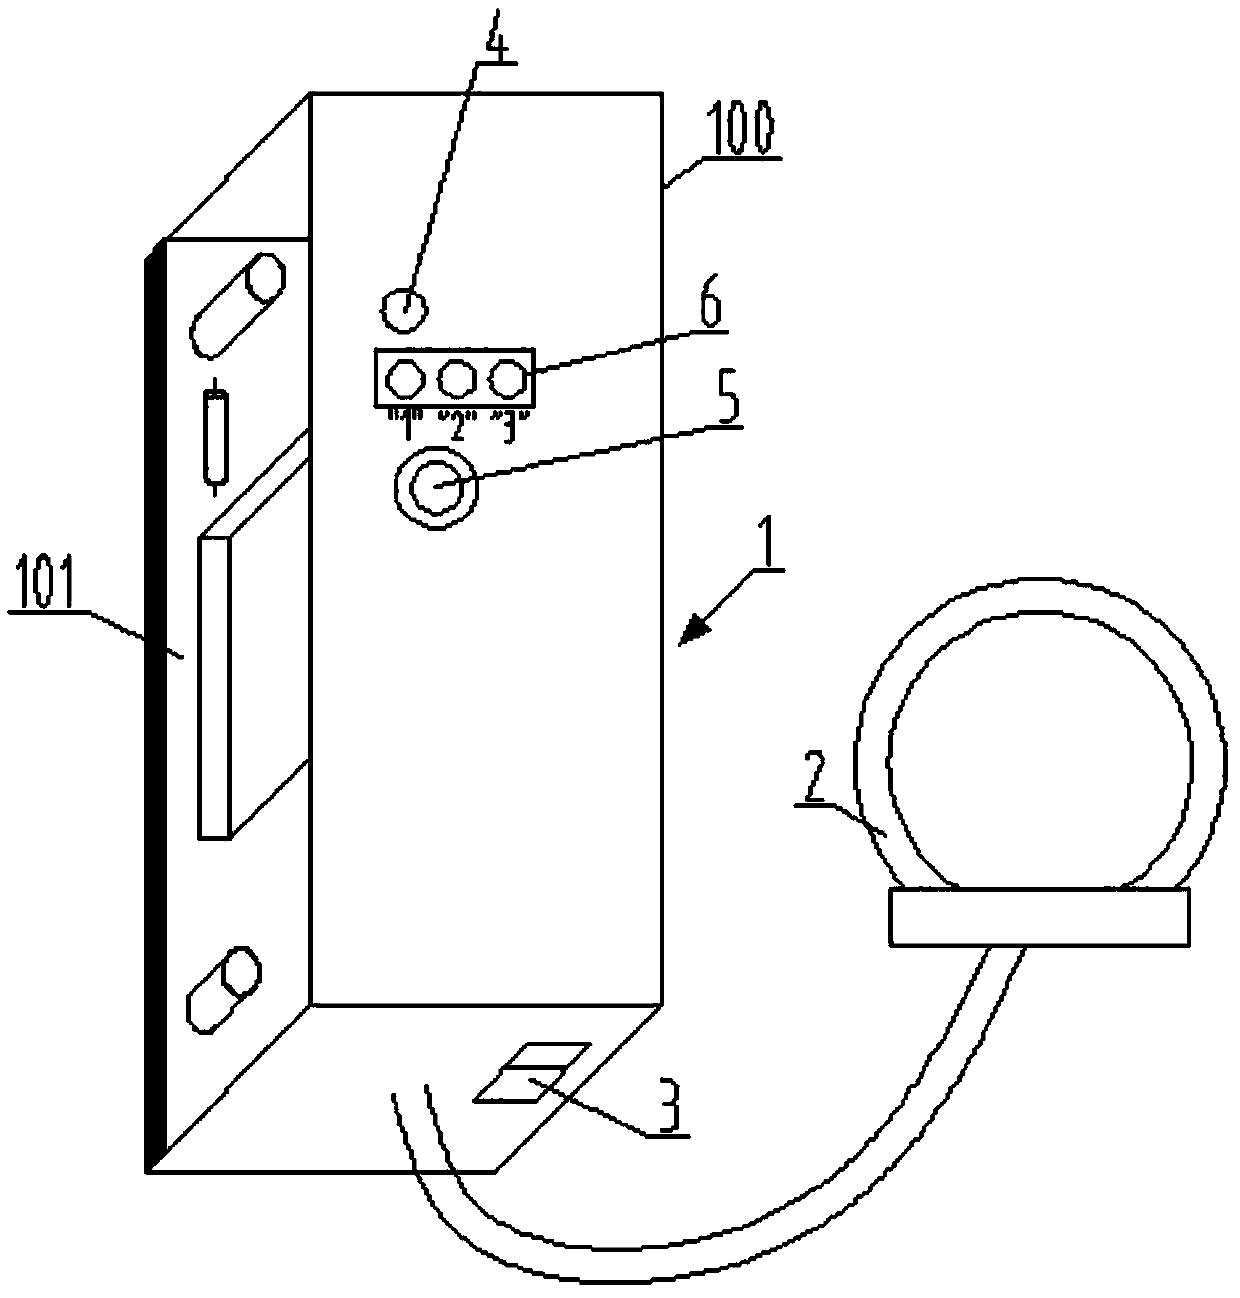 Power-off type electric leakage signal identification method and power-off type electric leakage indicating device